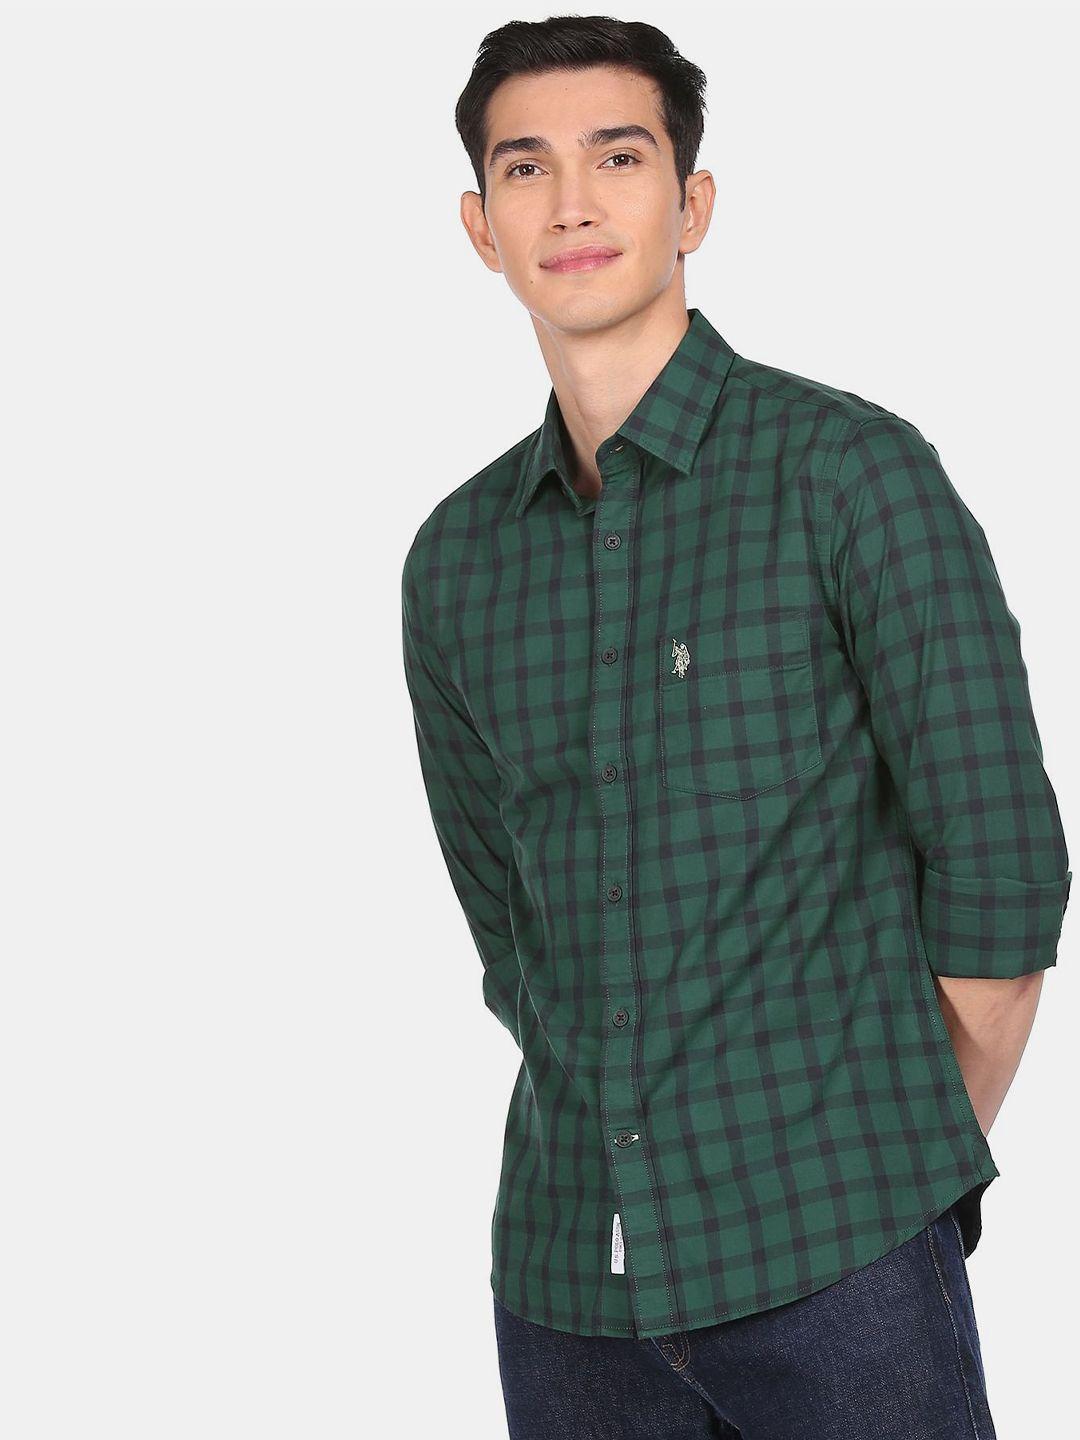 u-s-polo-assn-men-green-and-black-checked-regular-fit-100%-cotton-casual-shirt